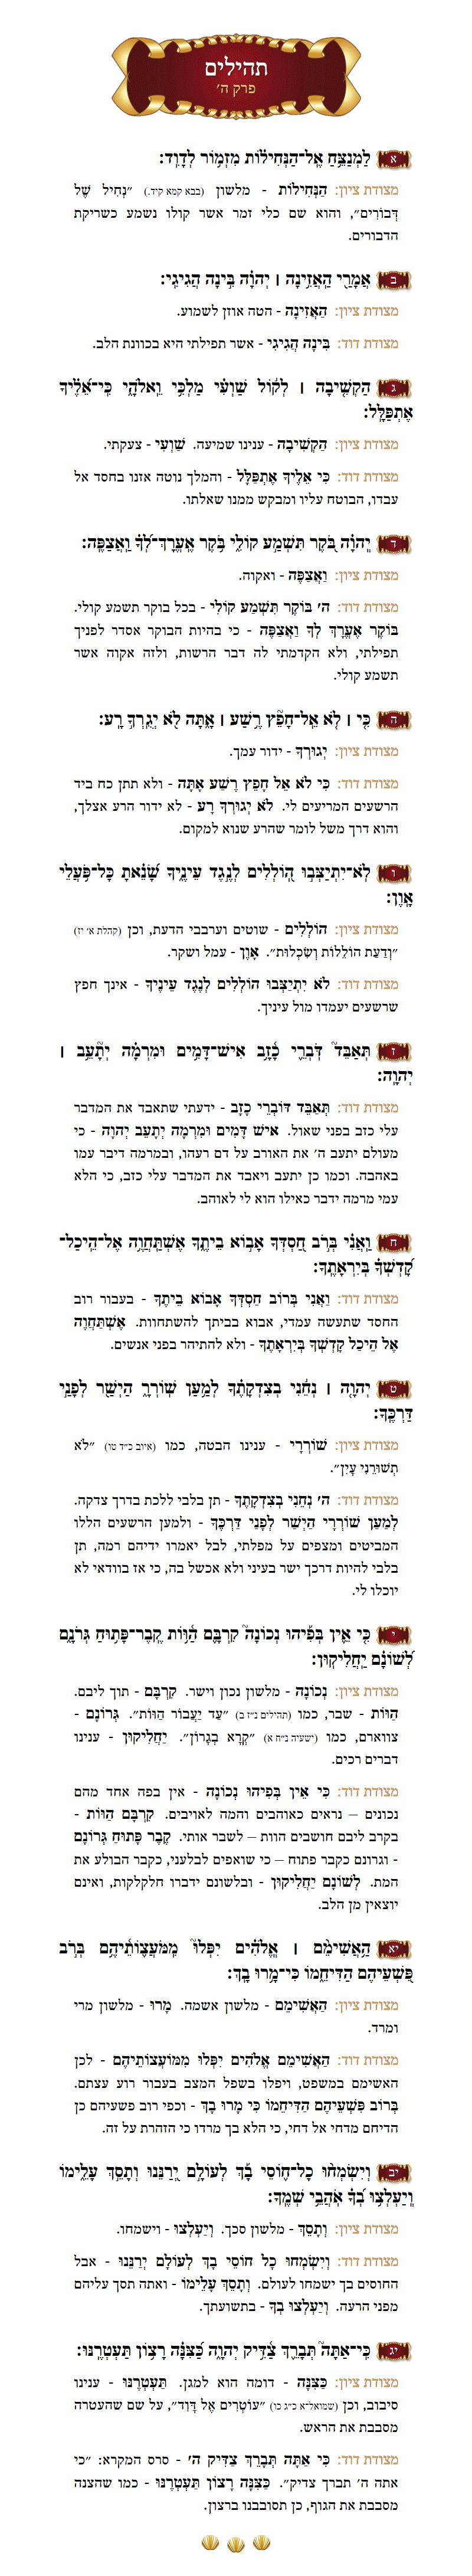 Sefer Tehillim Chapter 5 with commentary